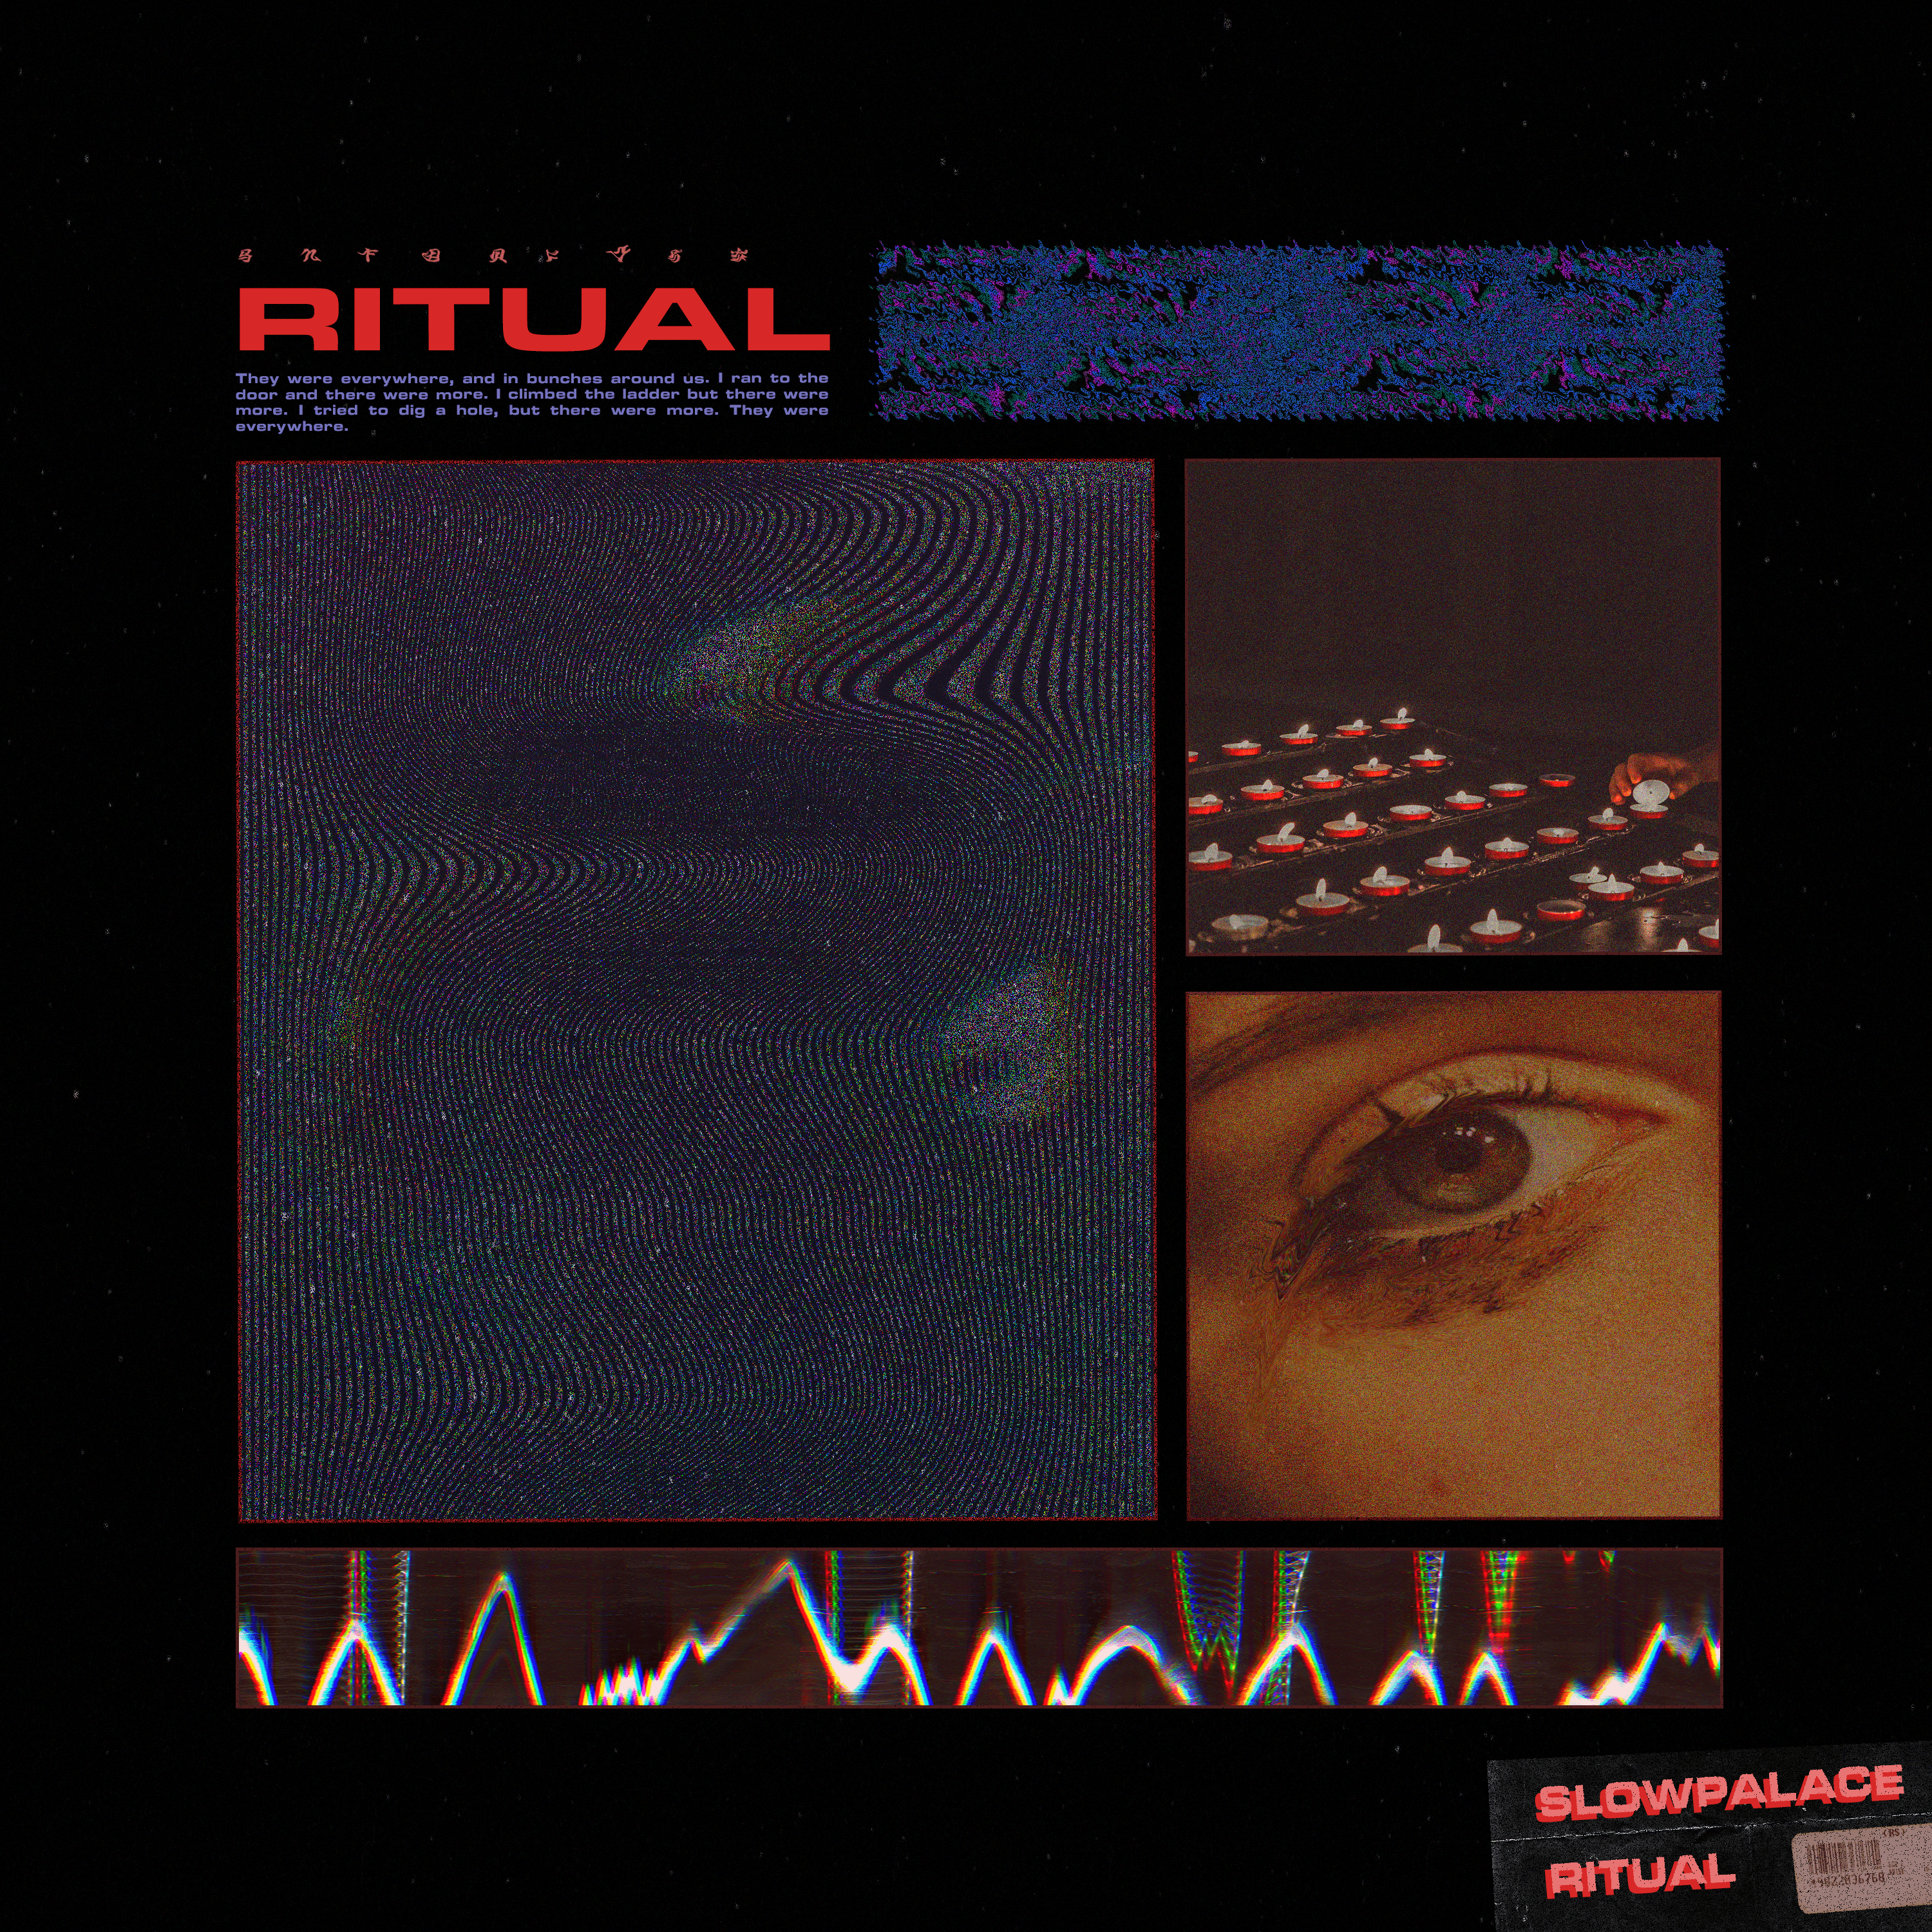 Cover art for Slowpalace's song: Ritual